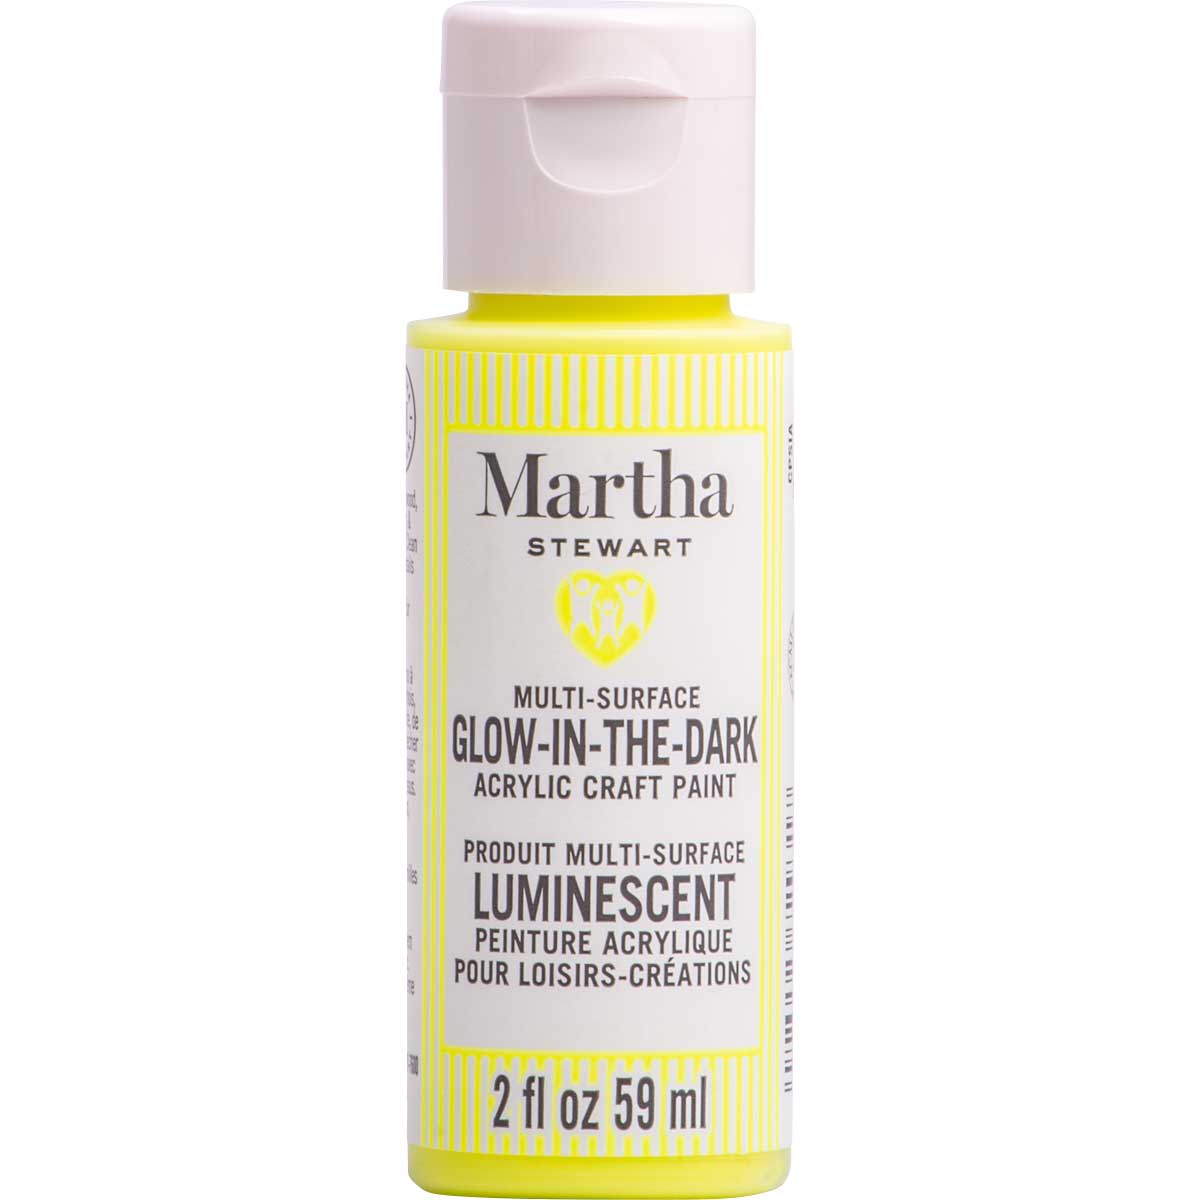 Martha Stewart ® Multi-Surface Glow-in-the-Dark Acrylic Craft Paint CPSIA - Chartreuse, 2 oz. - 7293